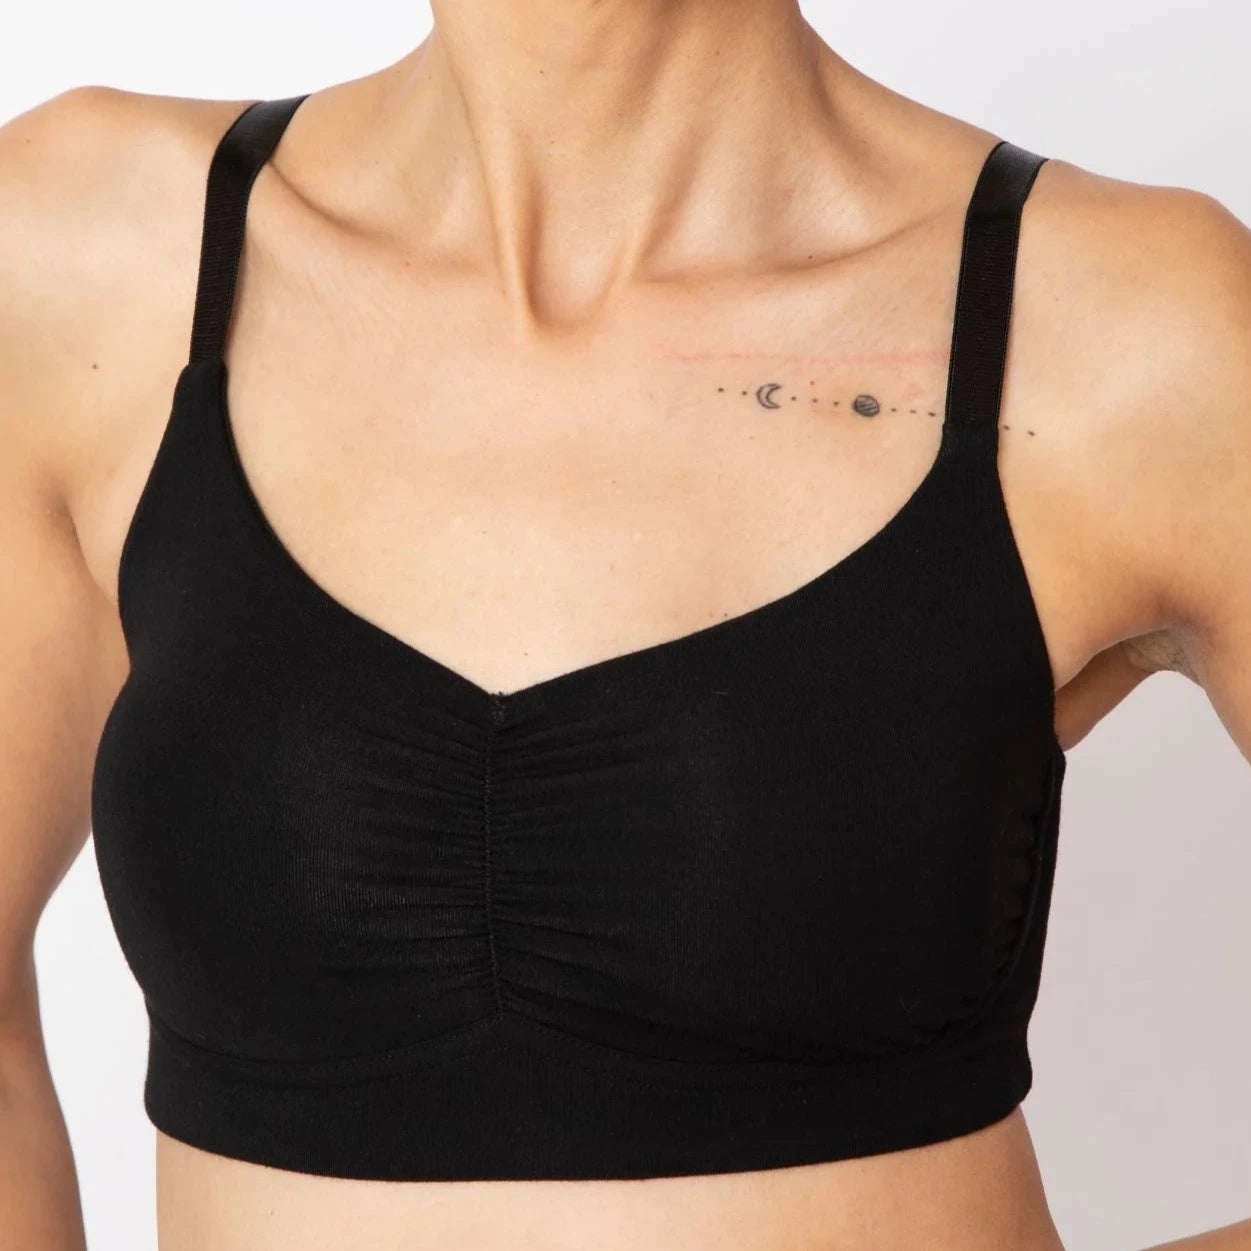 Monica Full Coverage Bra | AnaOno at Bra Sisters | Medium support full coverage bra in Black colour, suitable after a mastectomy.